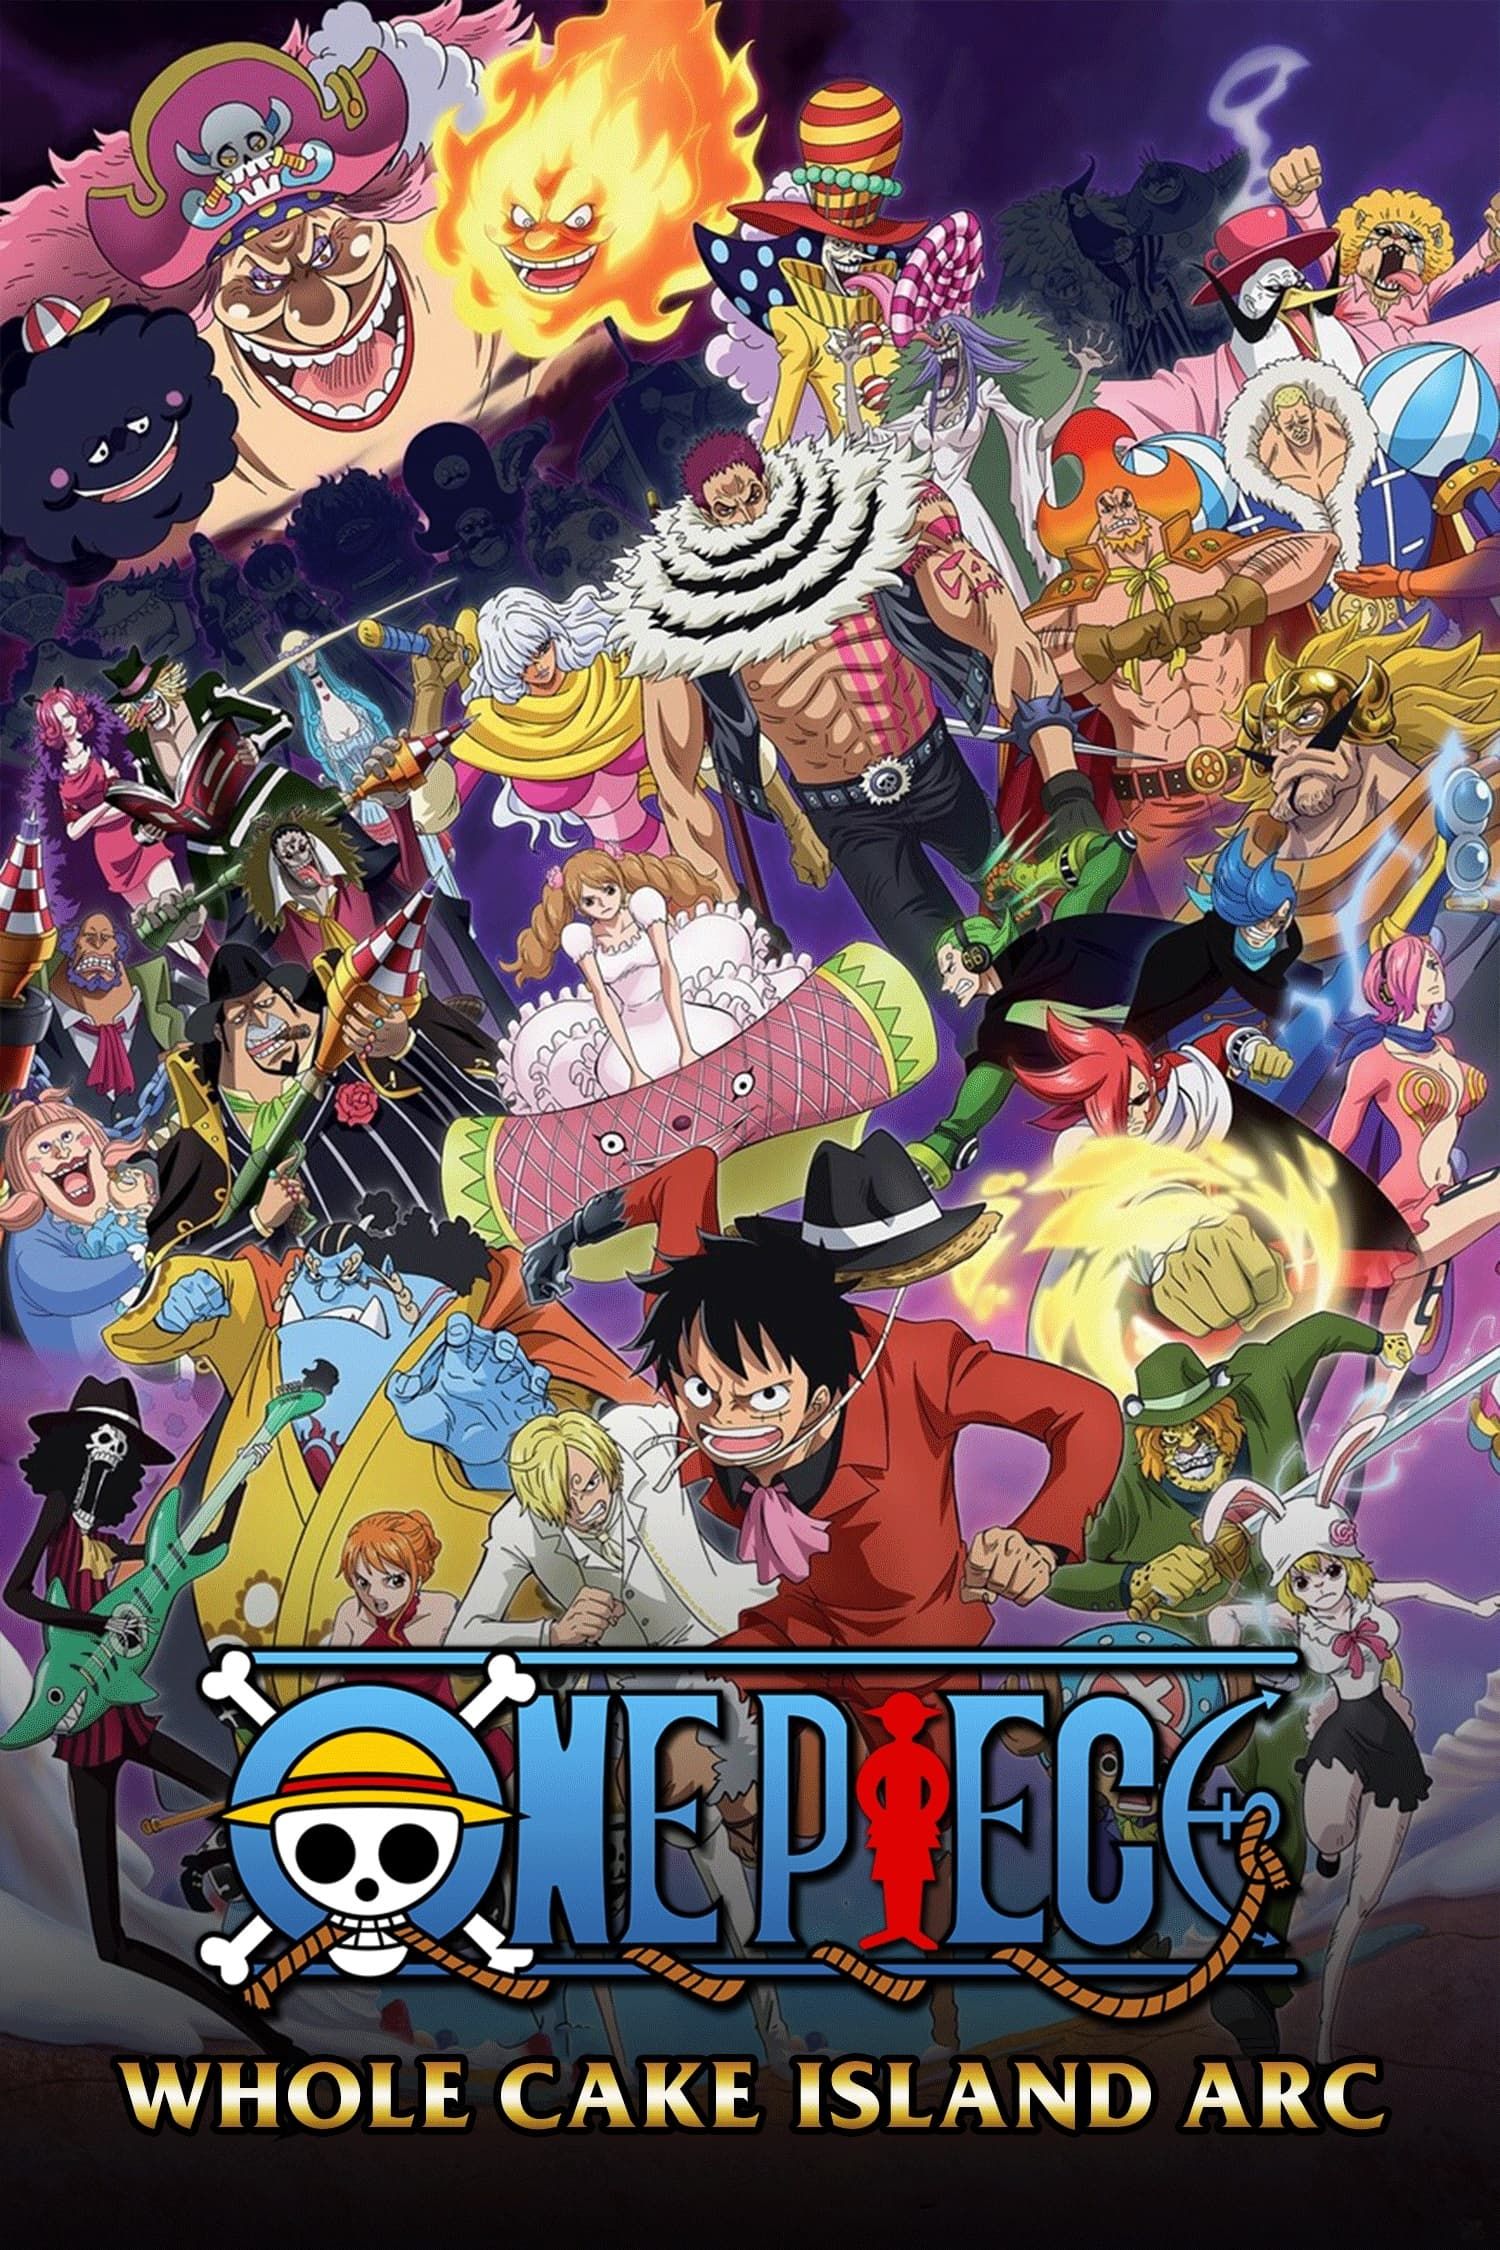 Buy One Piece: Episode of East Blue - Microsoft Store